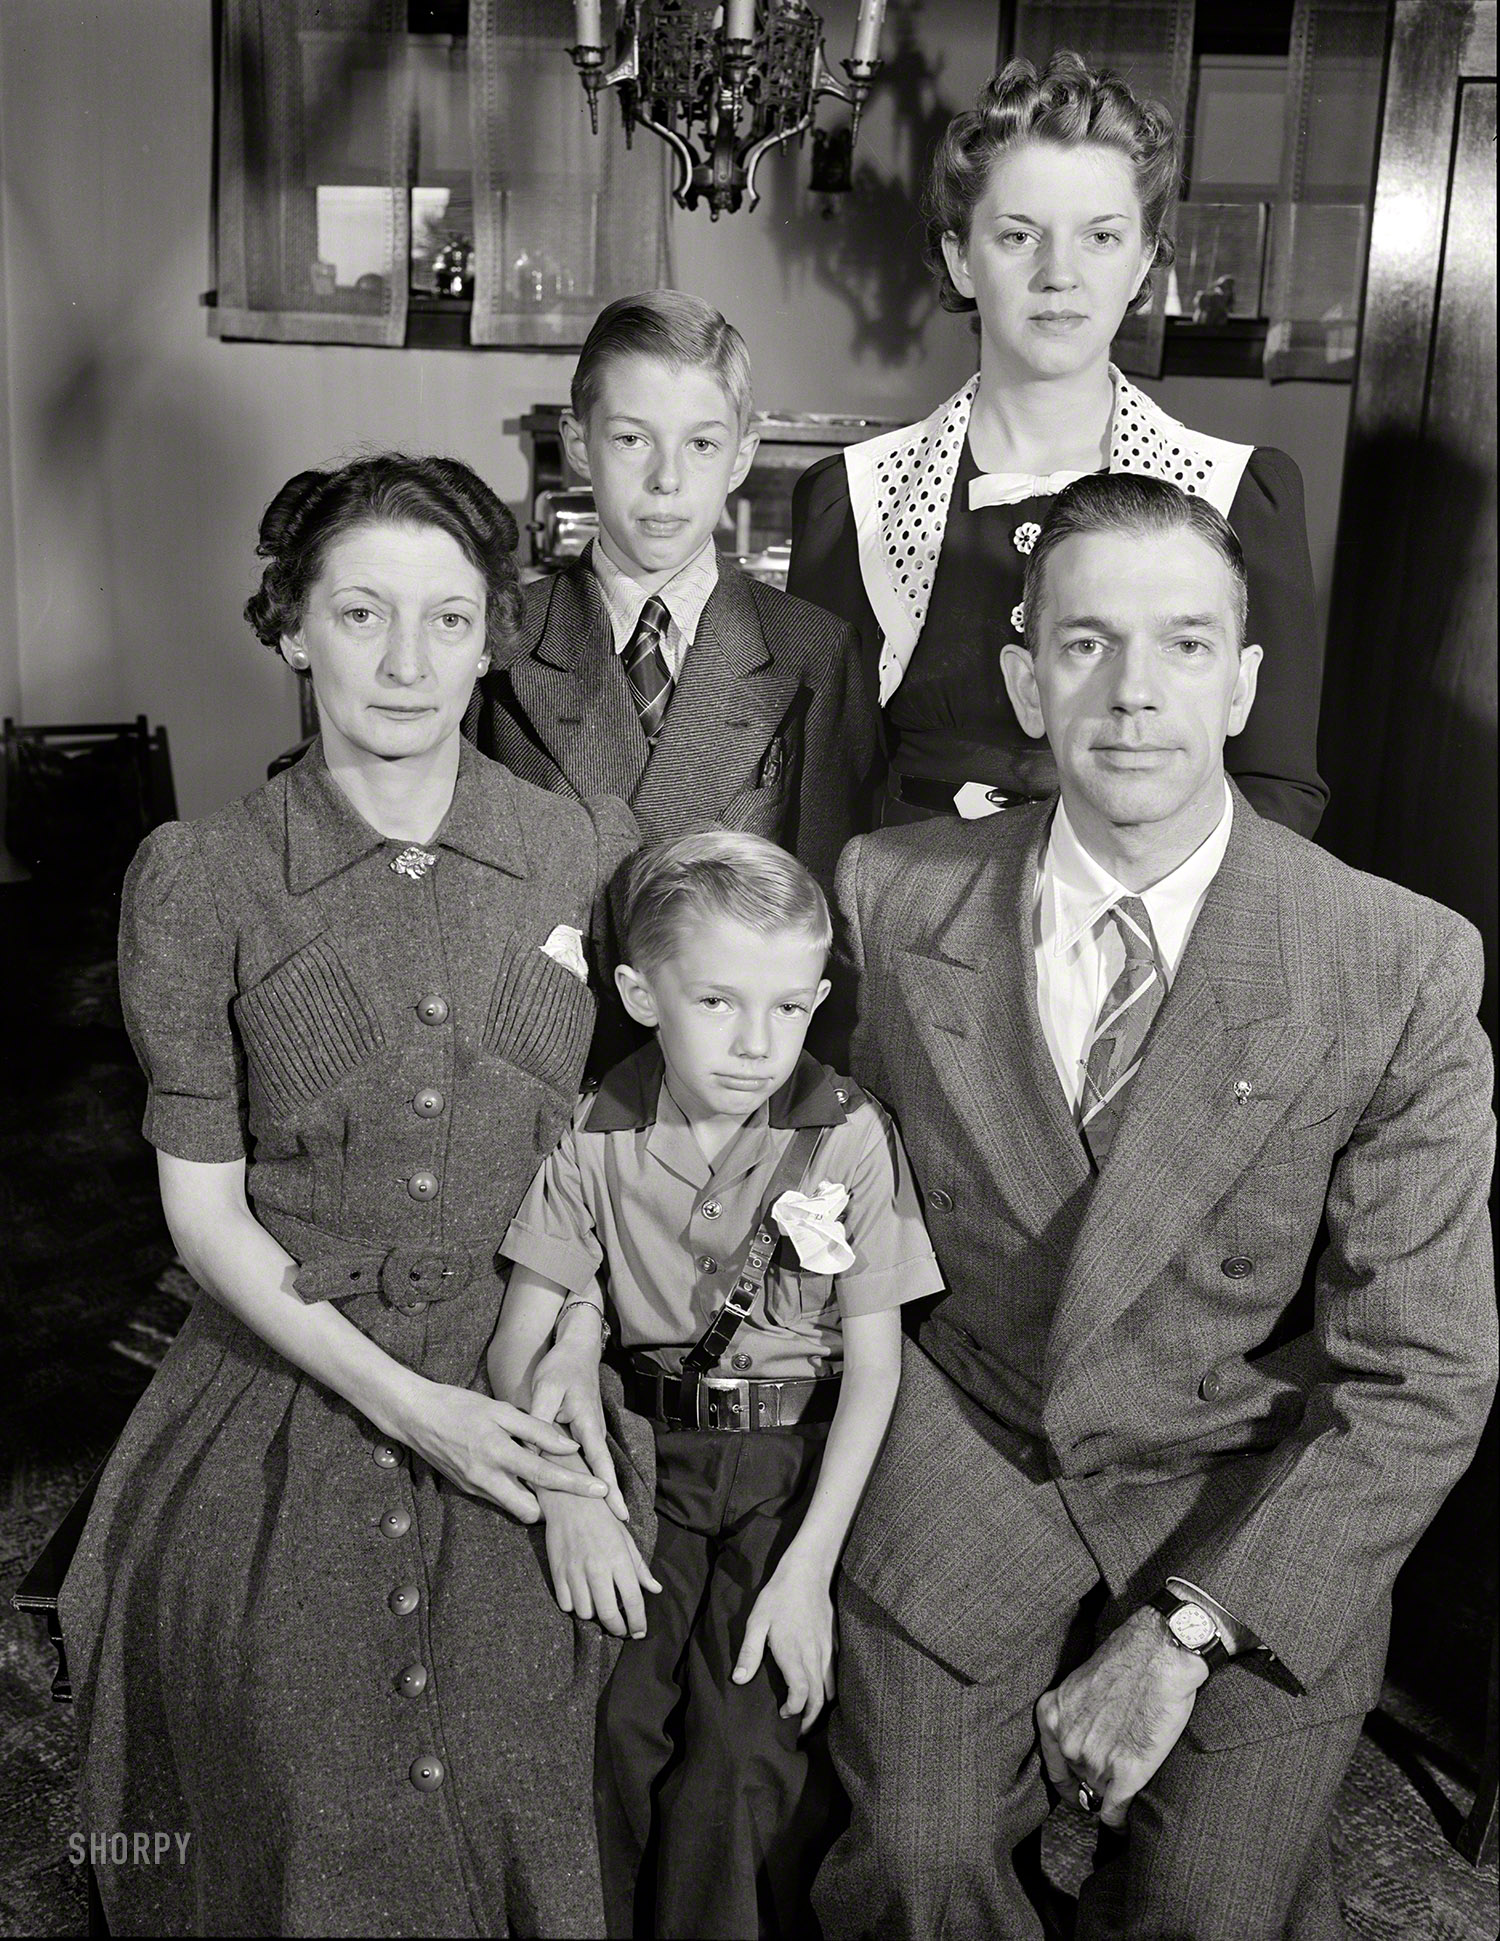 September 1942. Rochester, New York. "The Babcocks, a typical American war worker's family." About whom we will learn so much in the coming days. Large format negative by Ralph Amdursky, Office of War Information. View full size.